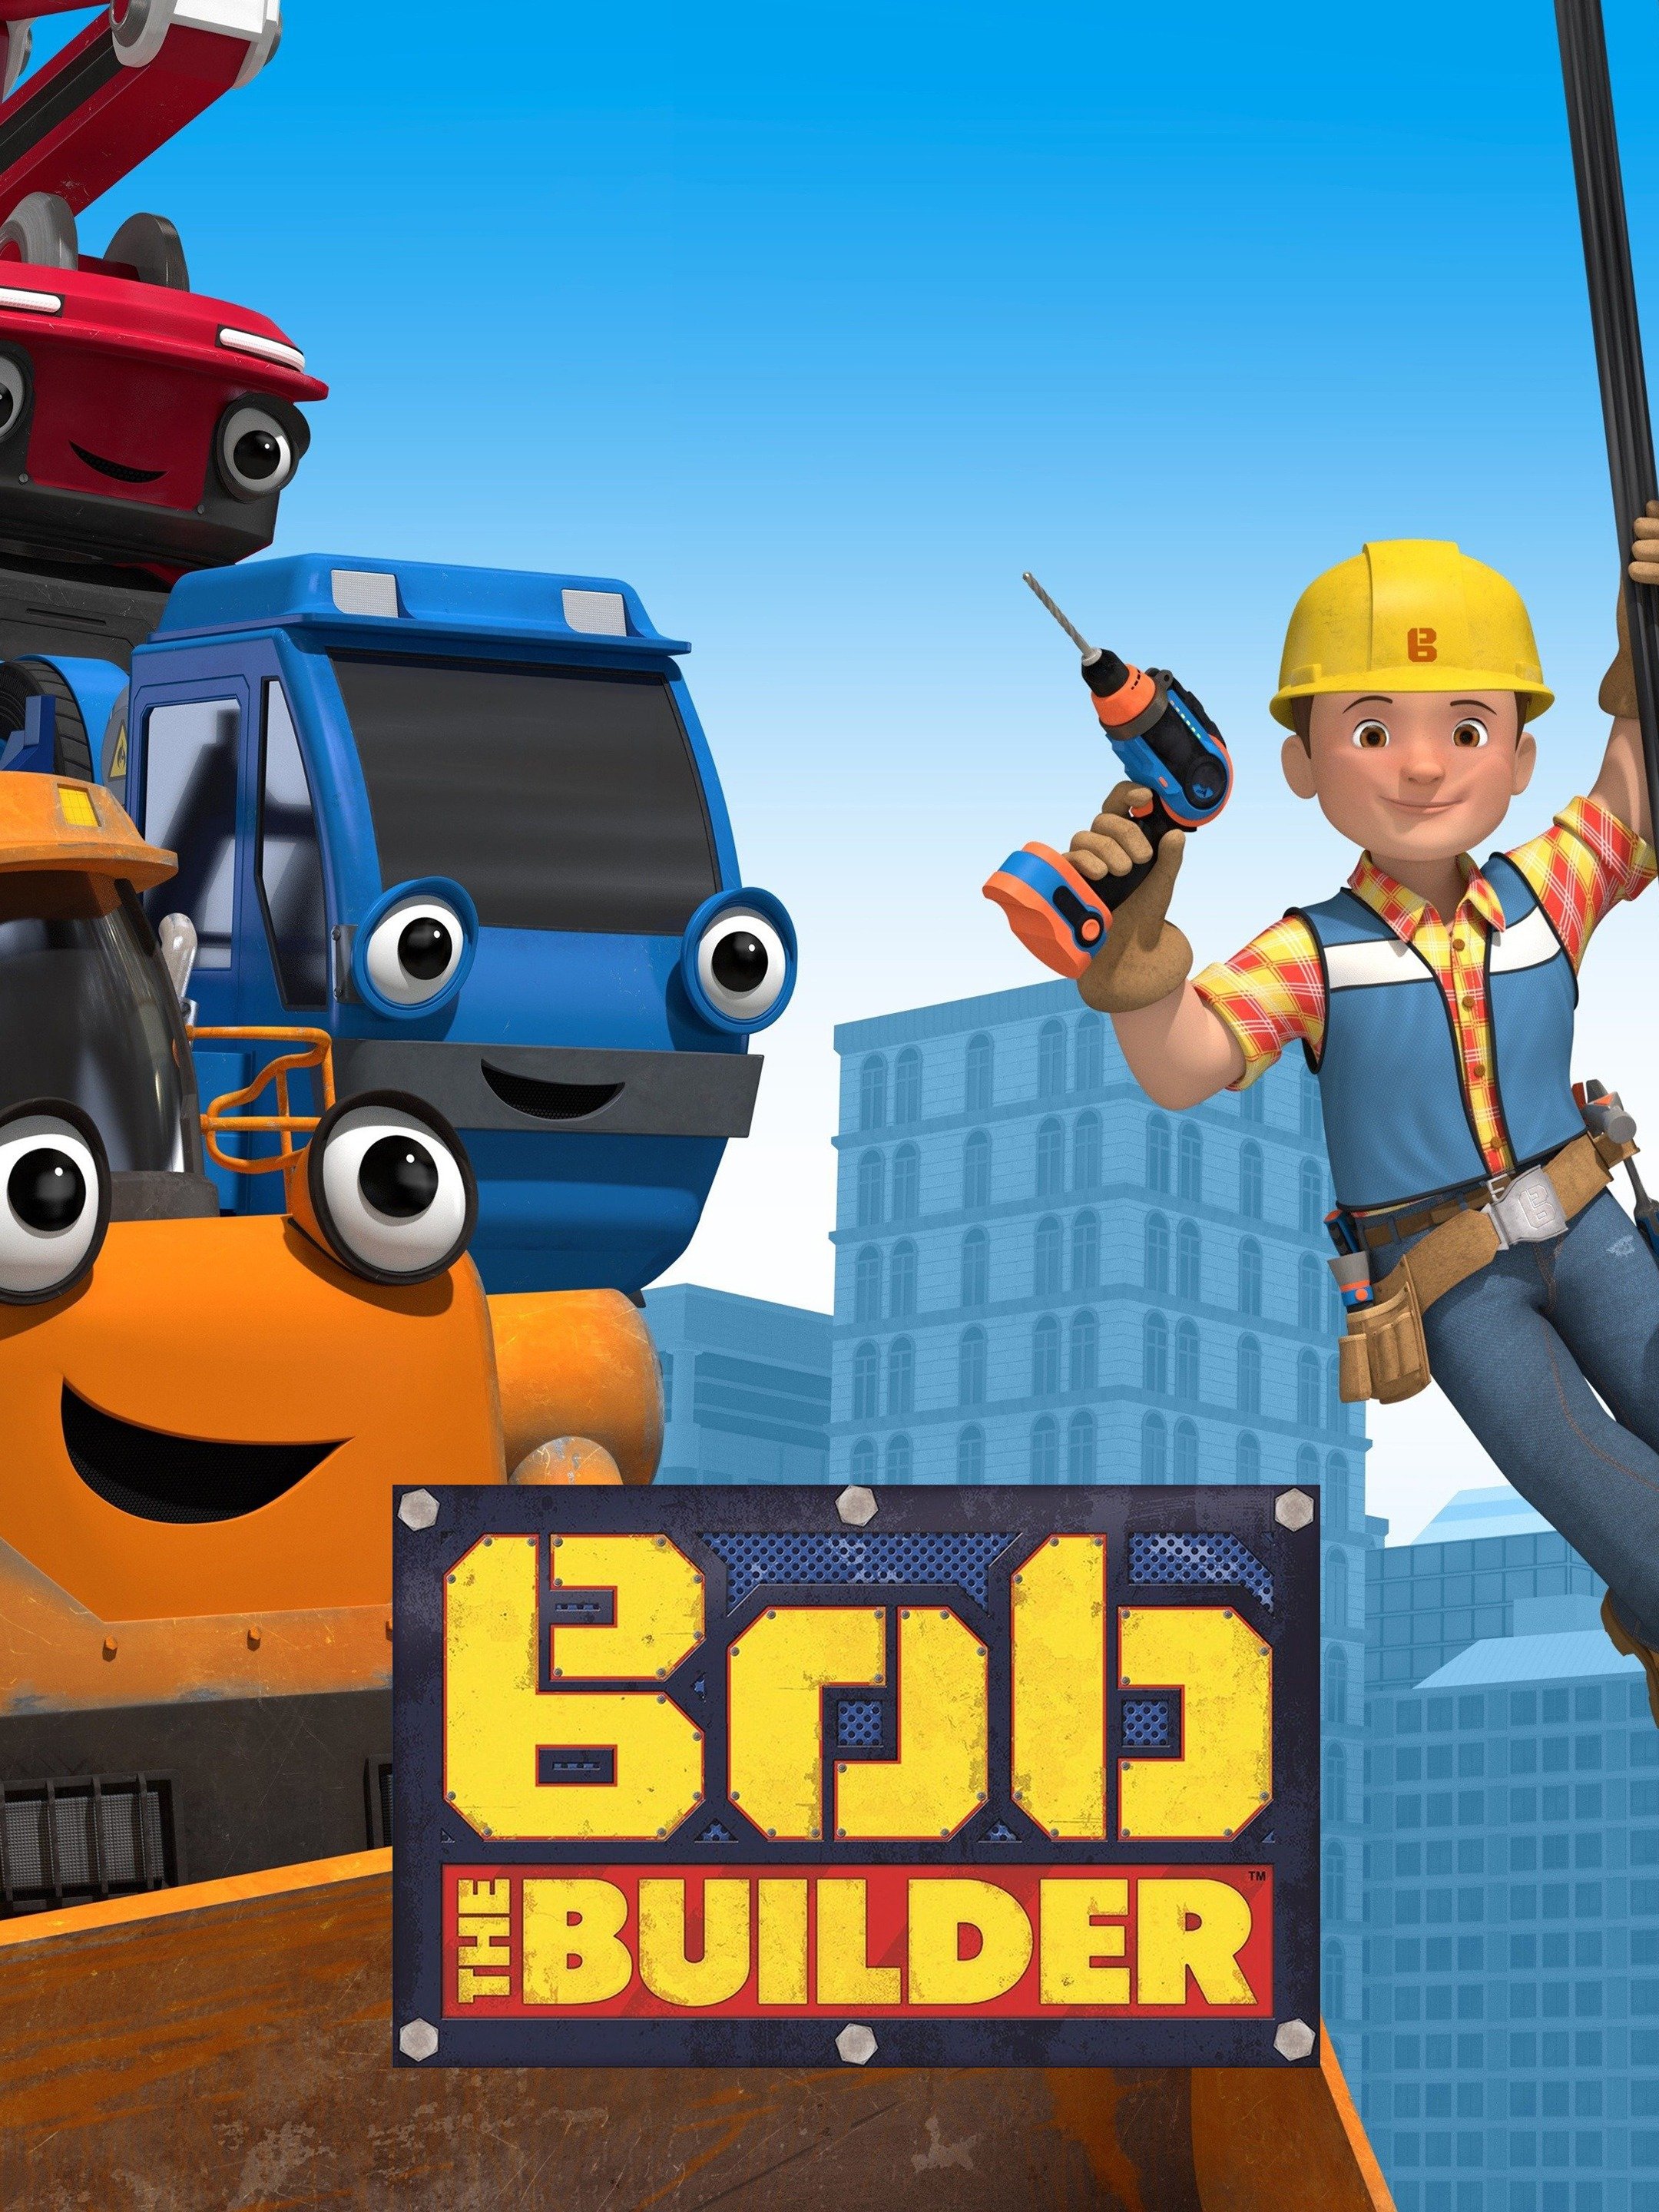 Bob the Builder: Season 1 Pictures - Rotten Tomatoes